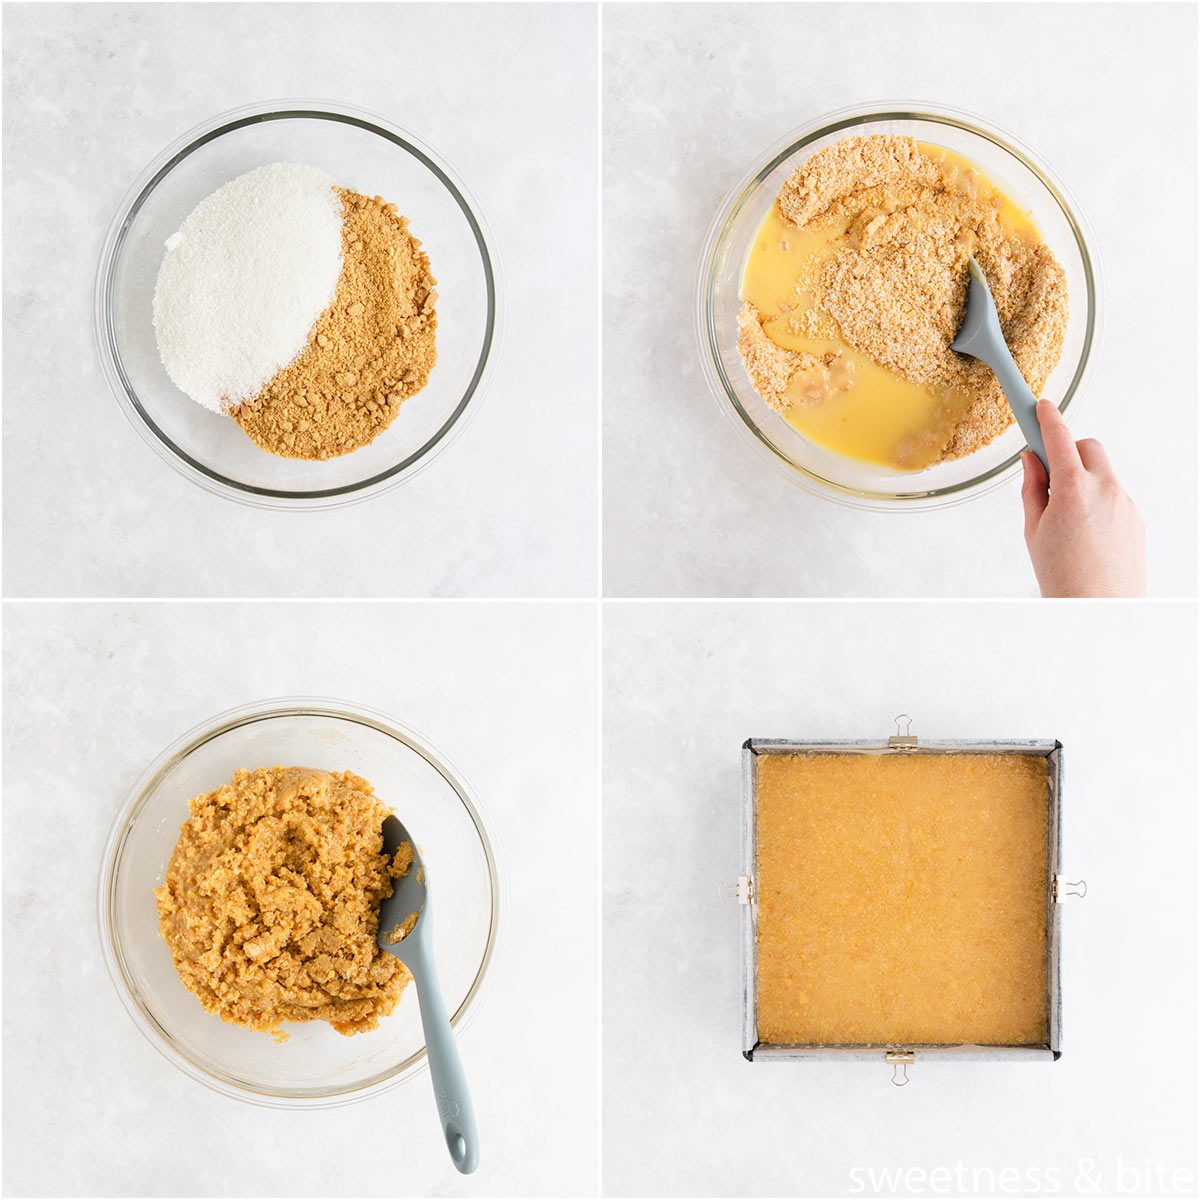 Collage of four images showing the dry ingredients in a bowl, the wet ingredients being added, and the mixture being pressed into the pan.